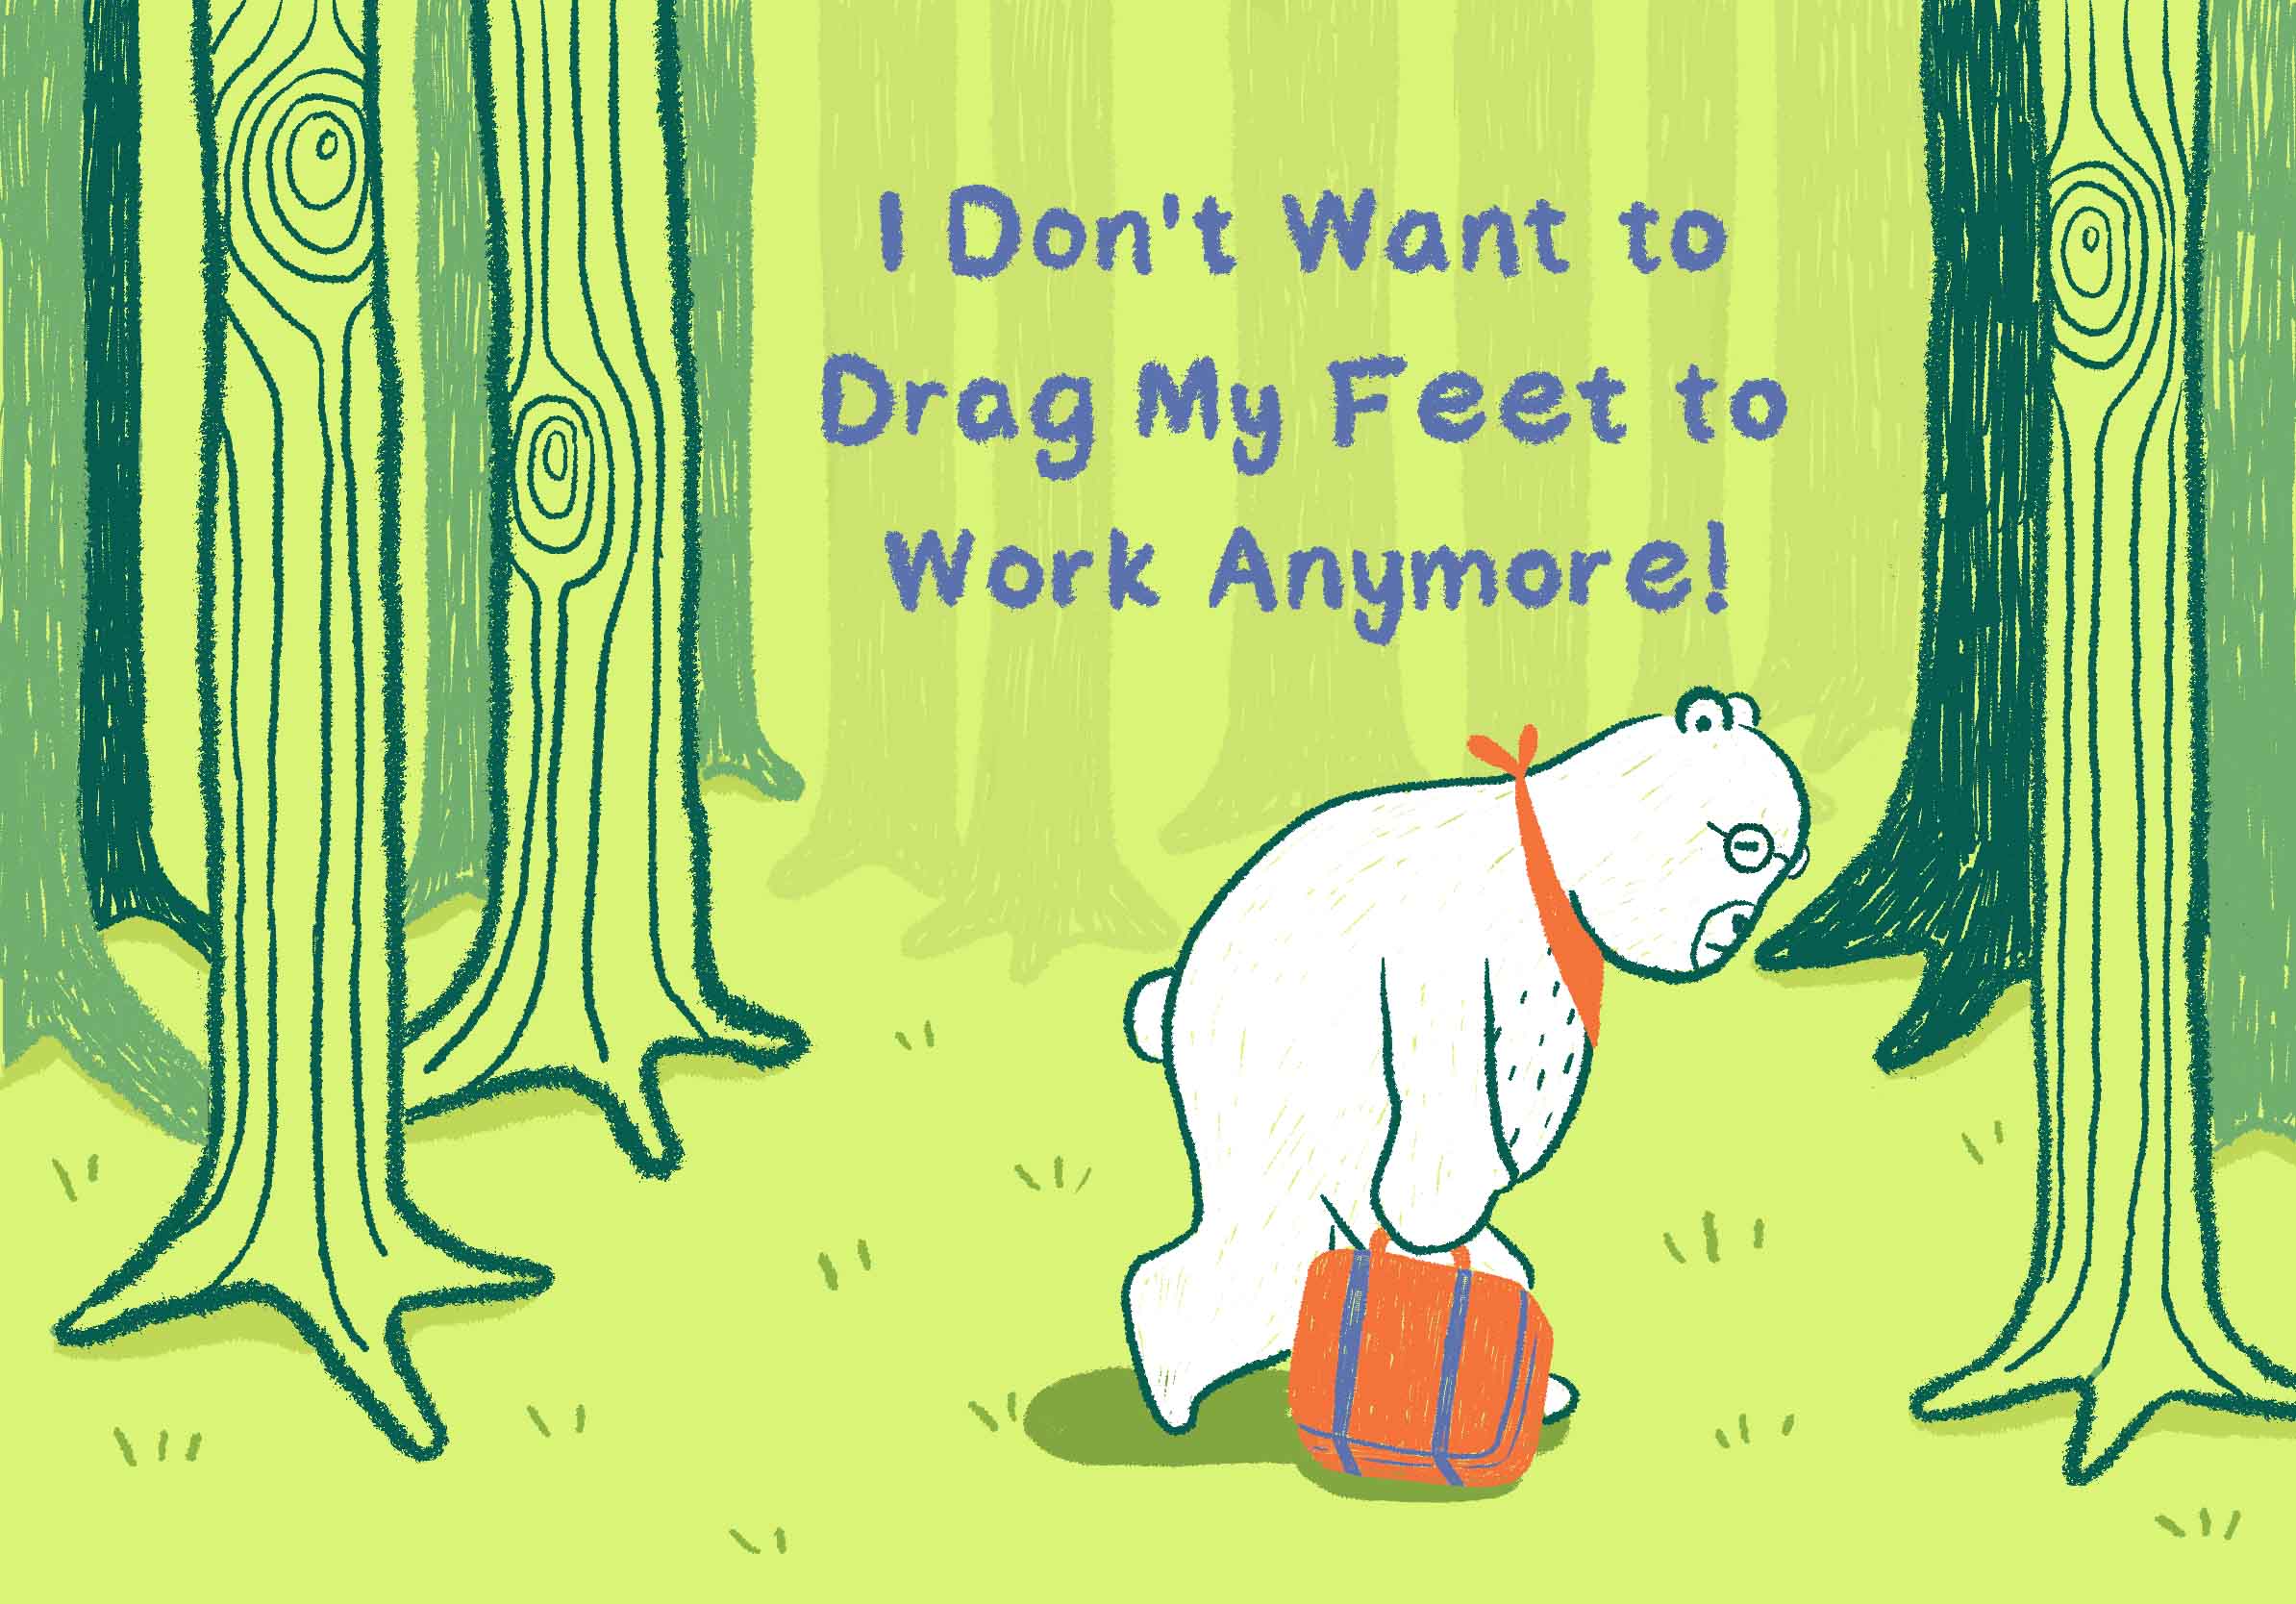 I Don’t Want to Drag My Feet to Work Anymore!